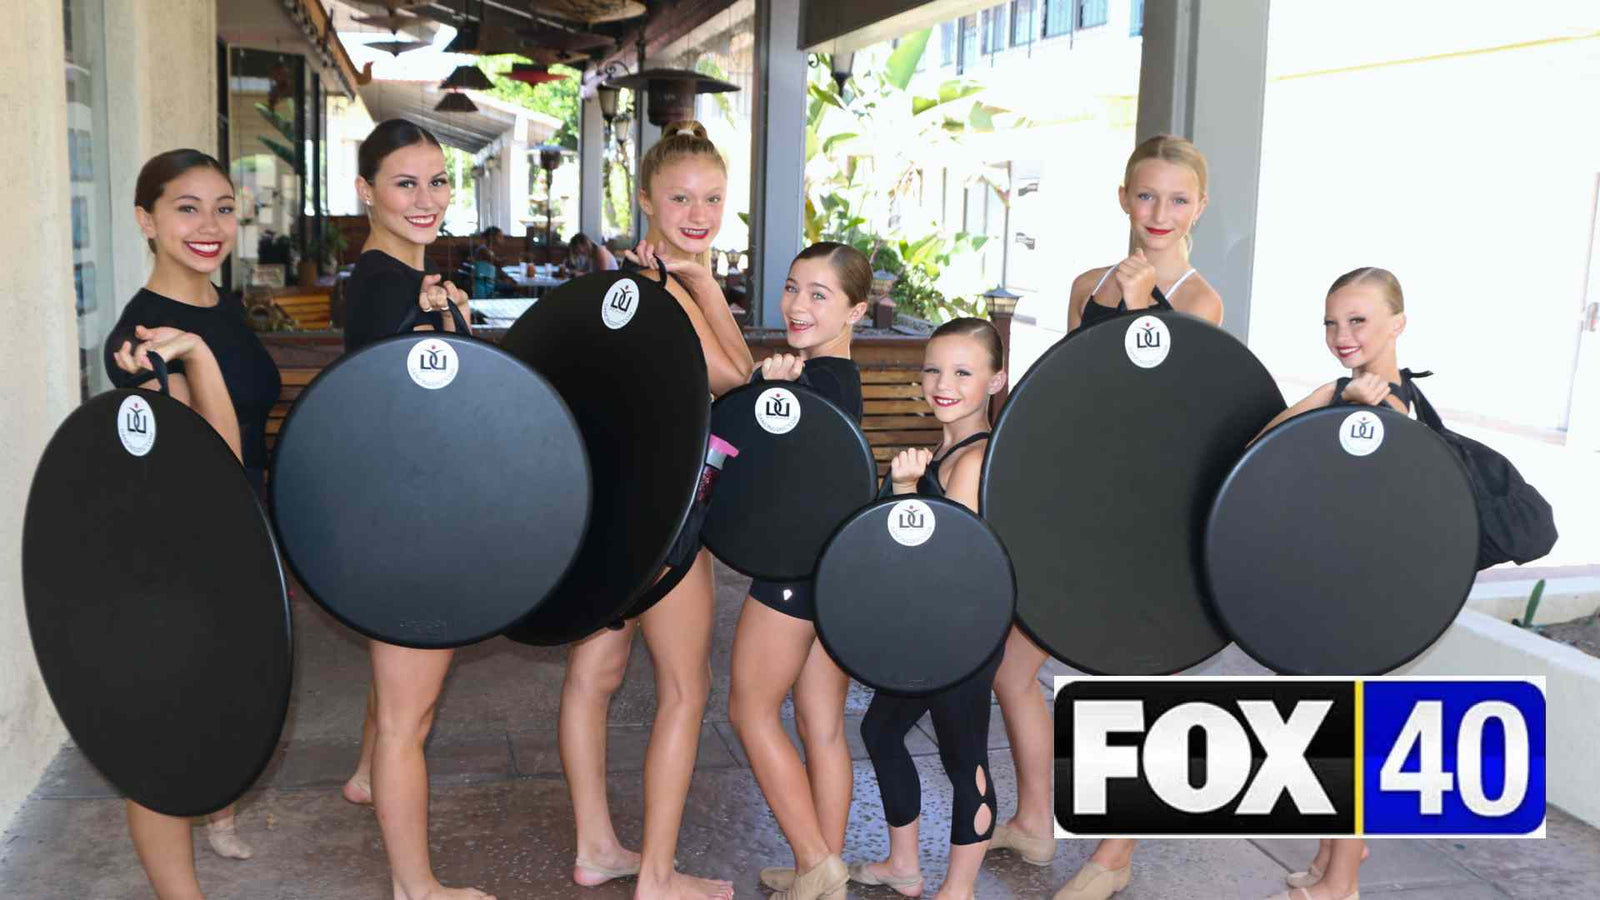 Revolutionizing Dance Safety: Dancing Disc Featured on Fox40 News!